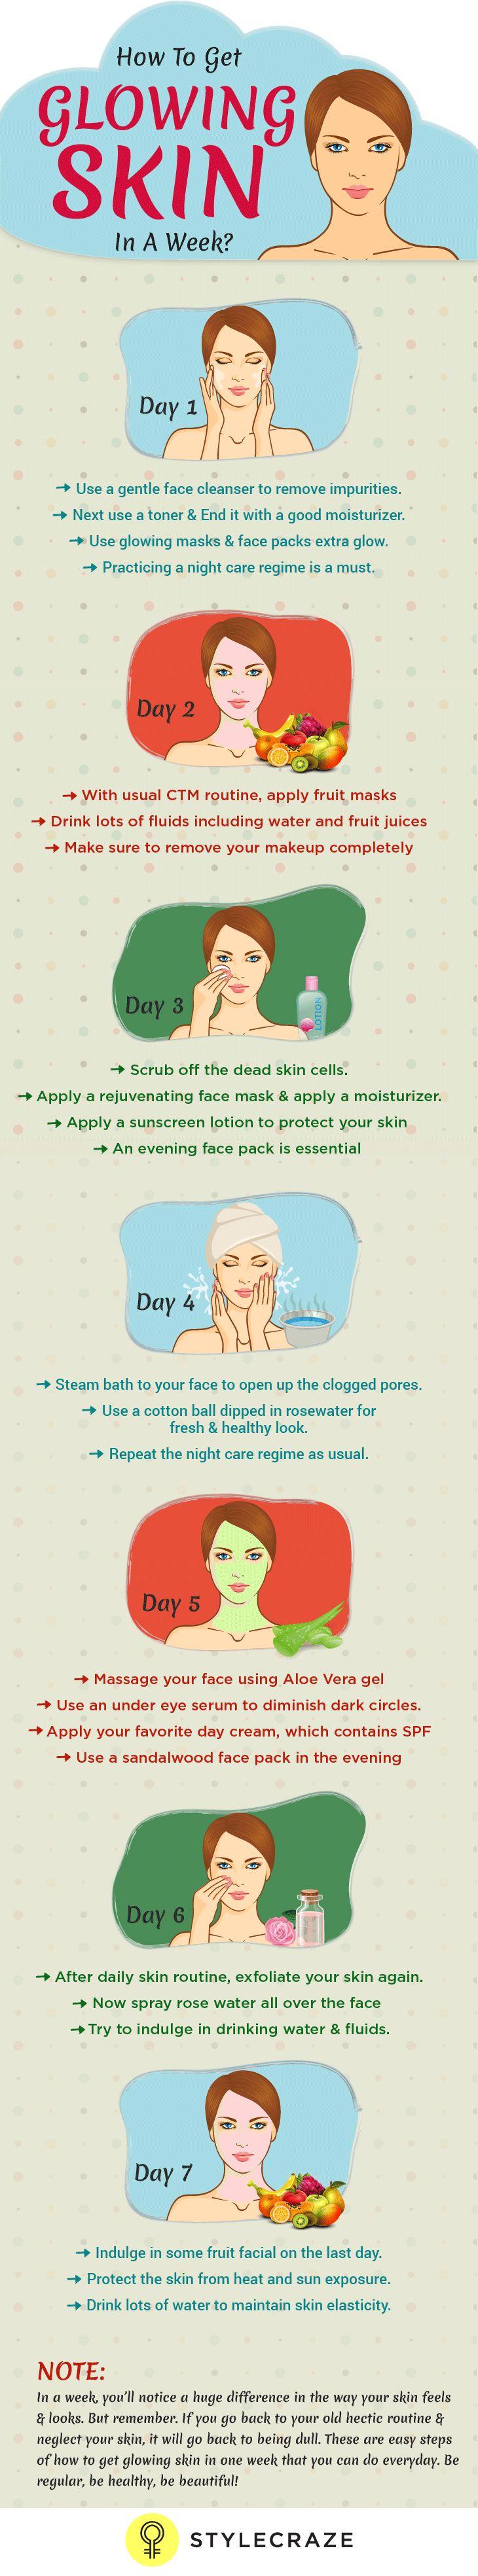 Hochzeit - How To Get Glowing Skin In 7 Days - With Day By Day Instructions